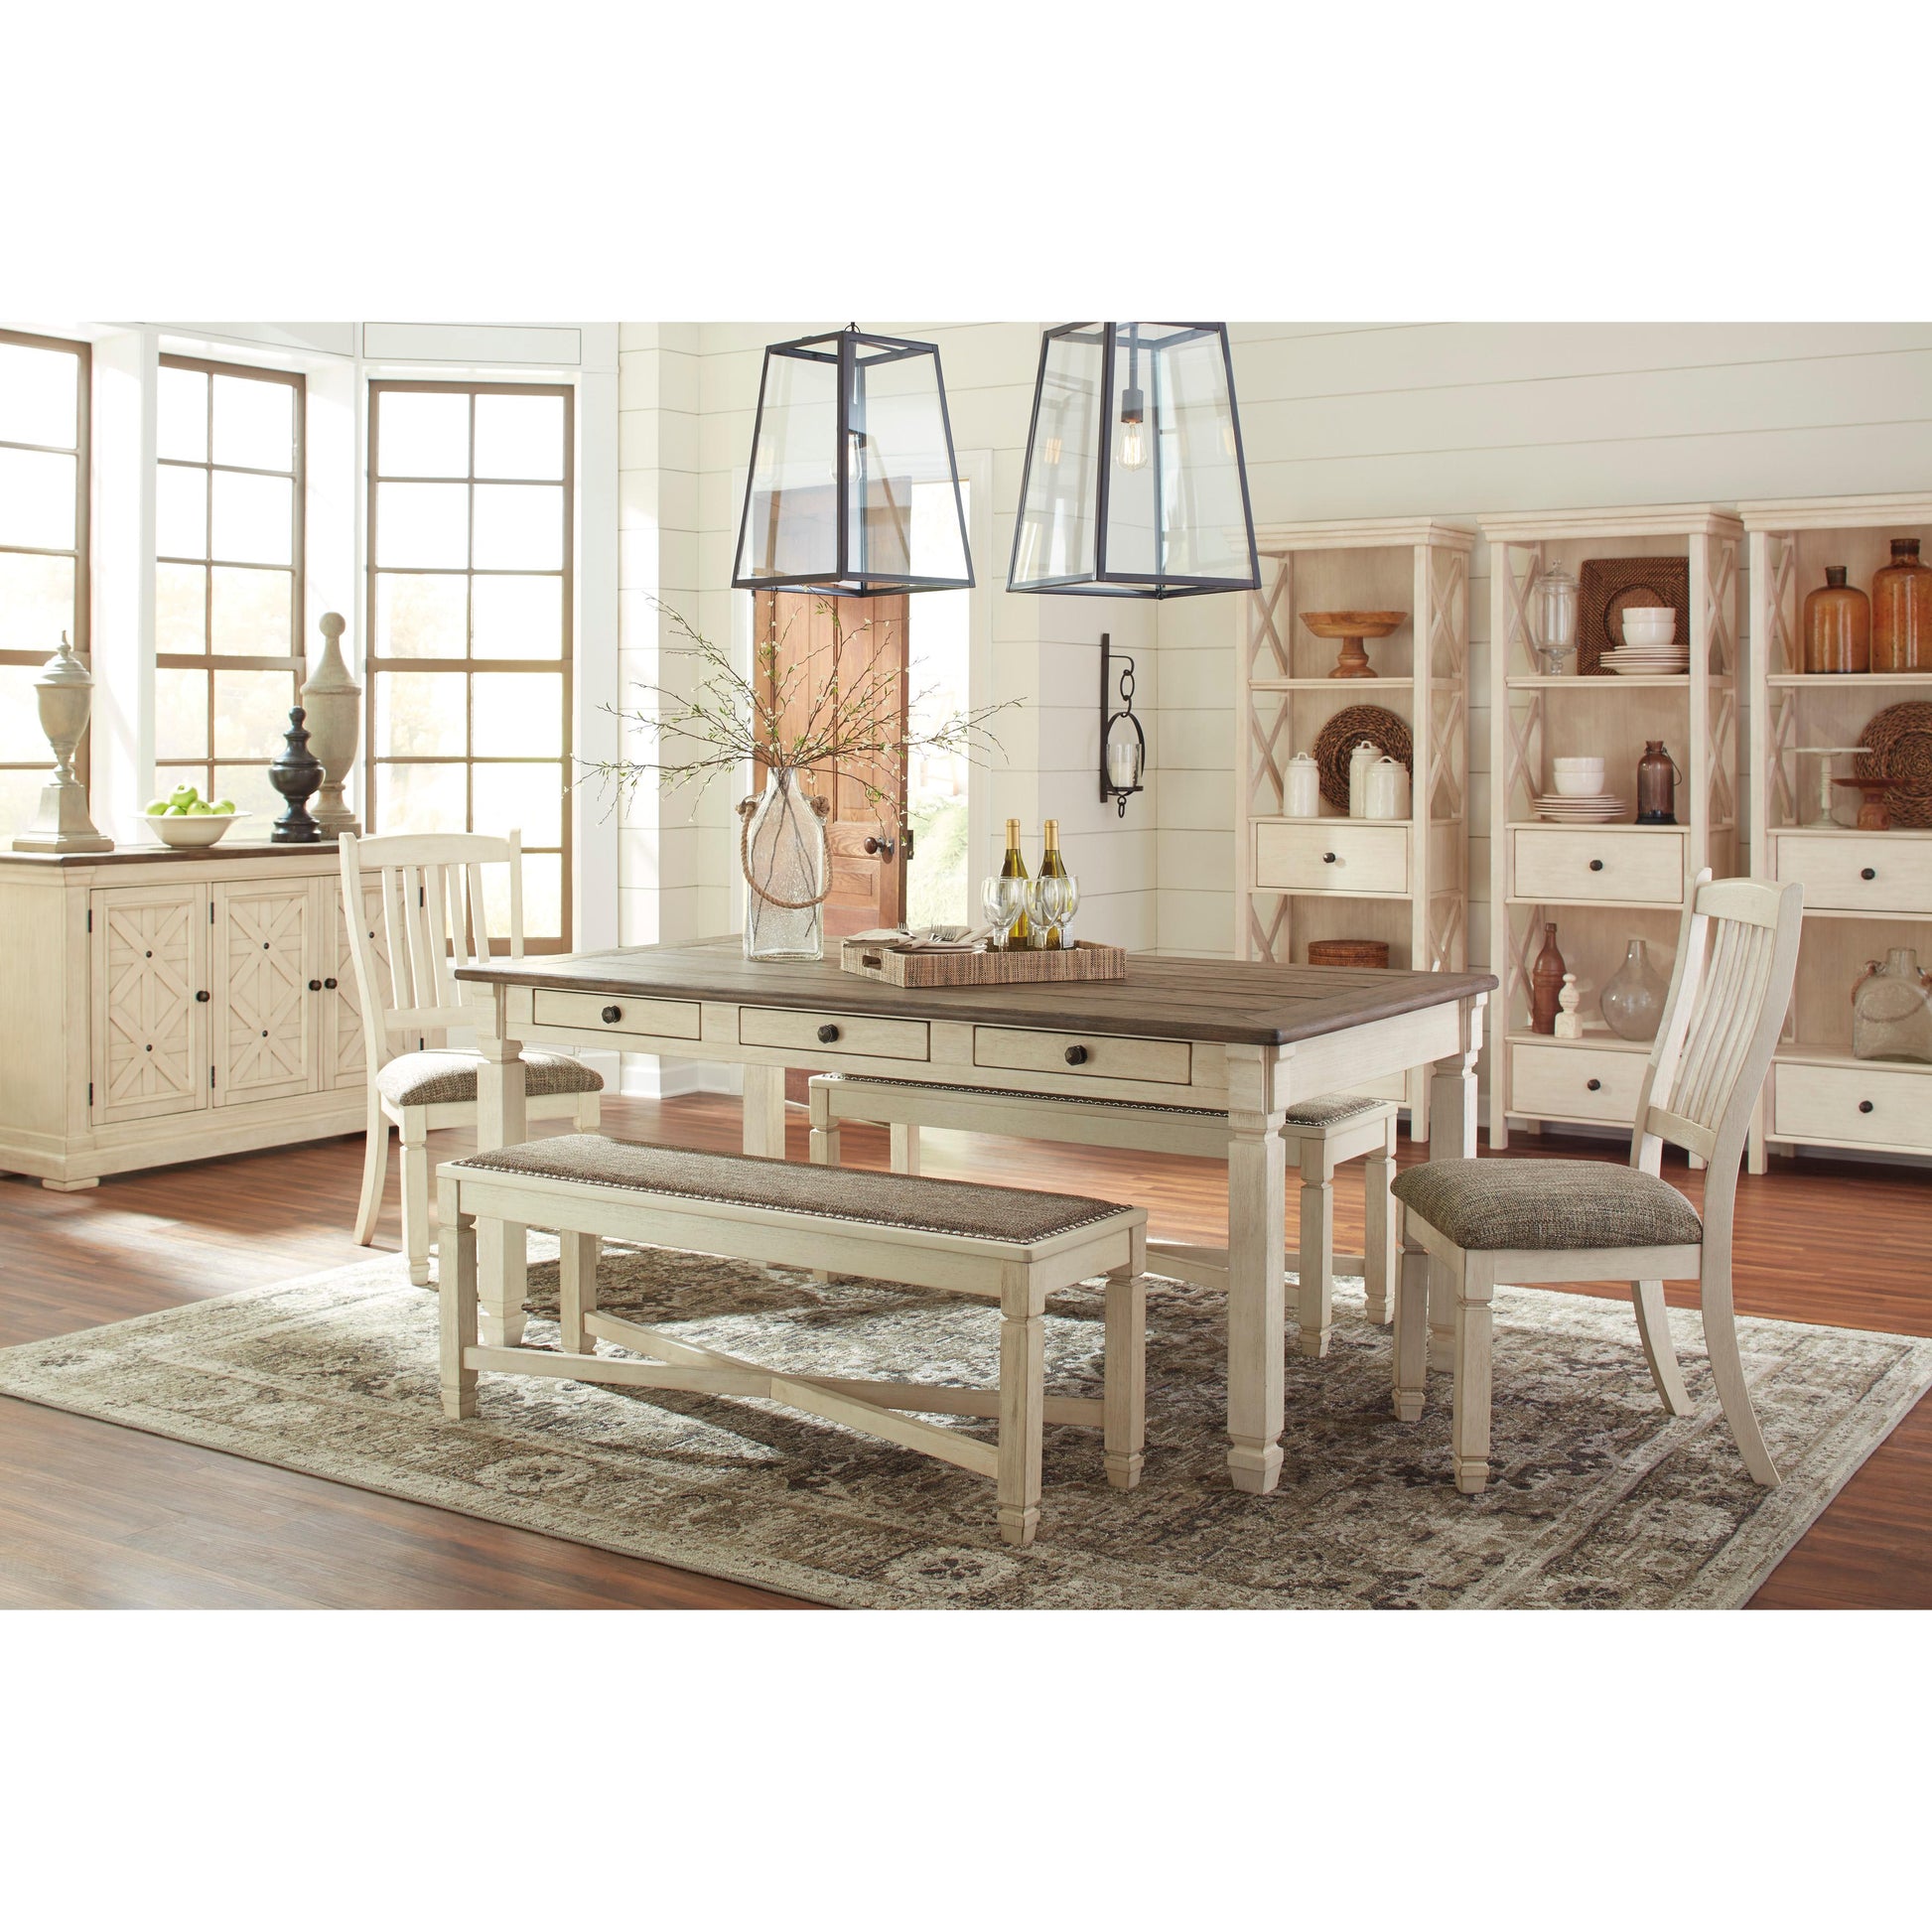 Signature Design by Ashley Bolanburg Dining Table D647-25